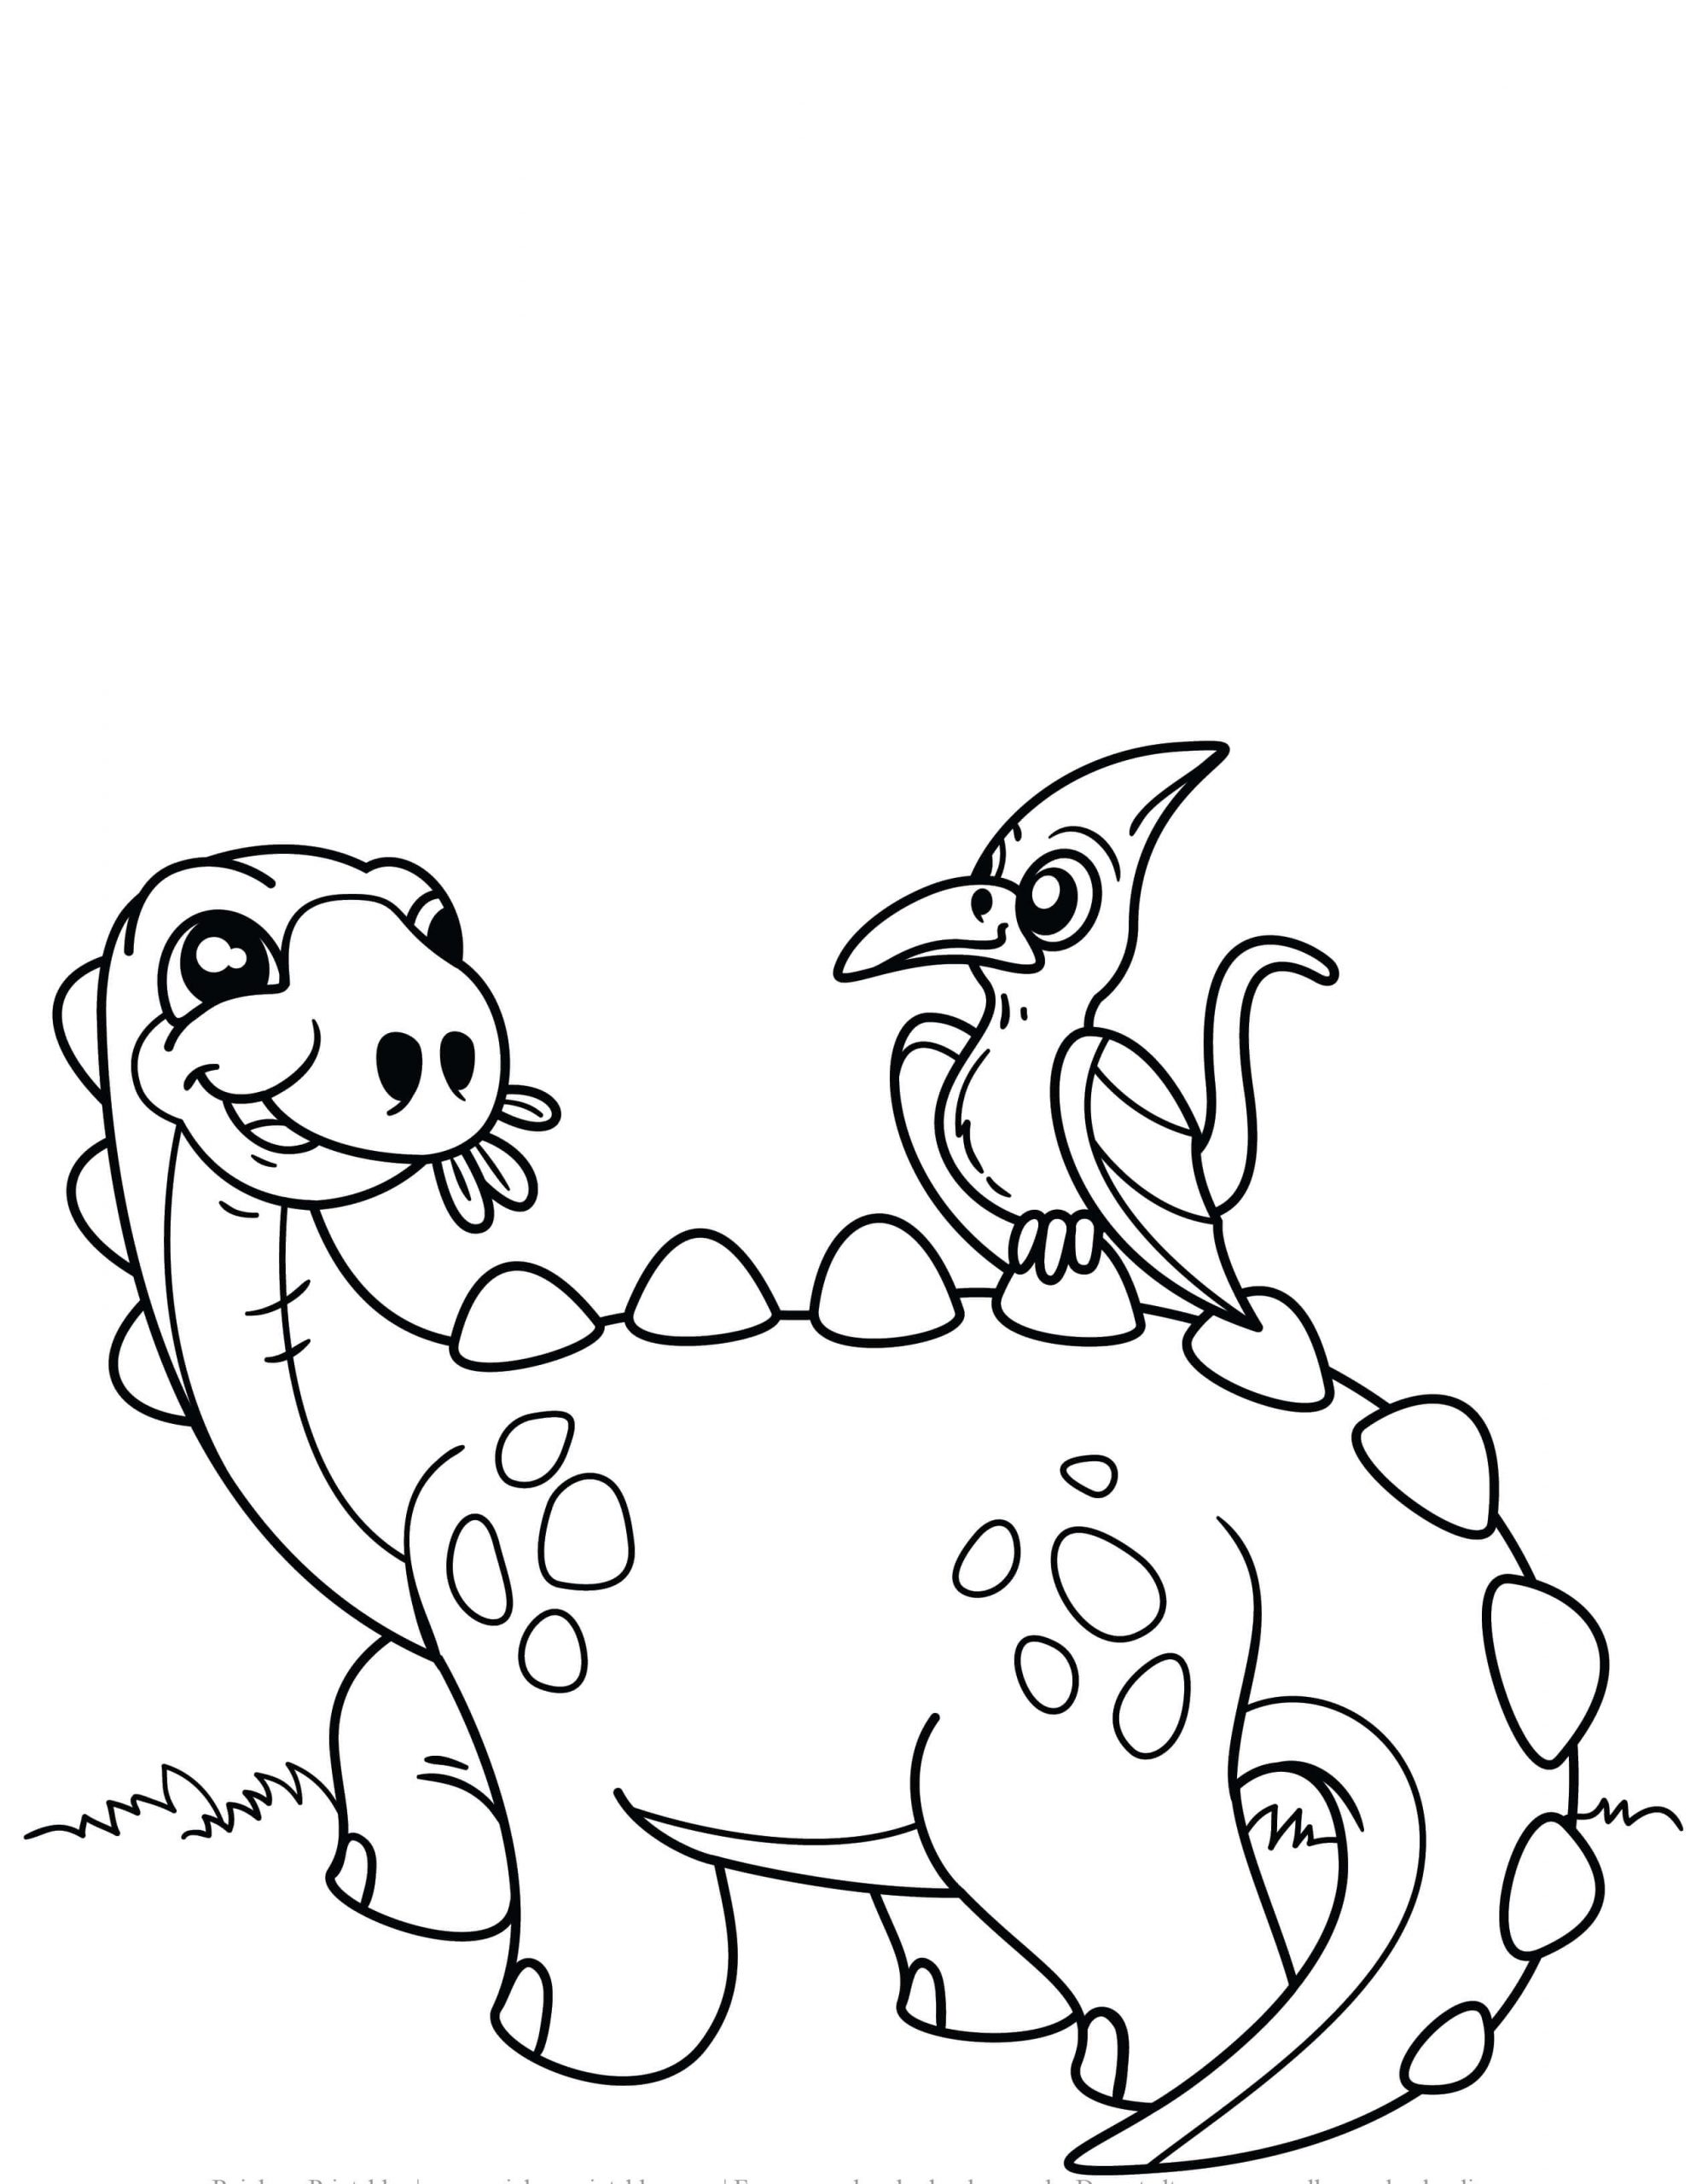 Dinosaures Heureux coloring page